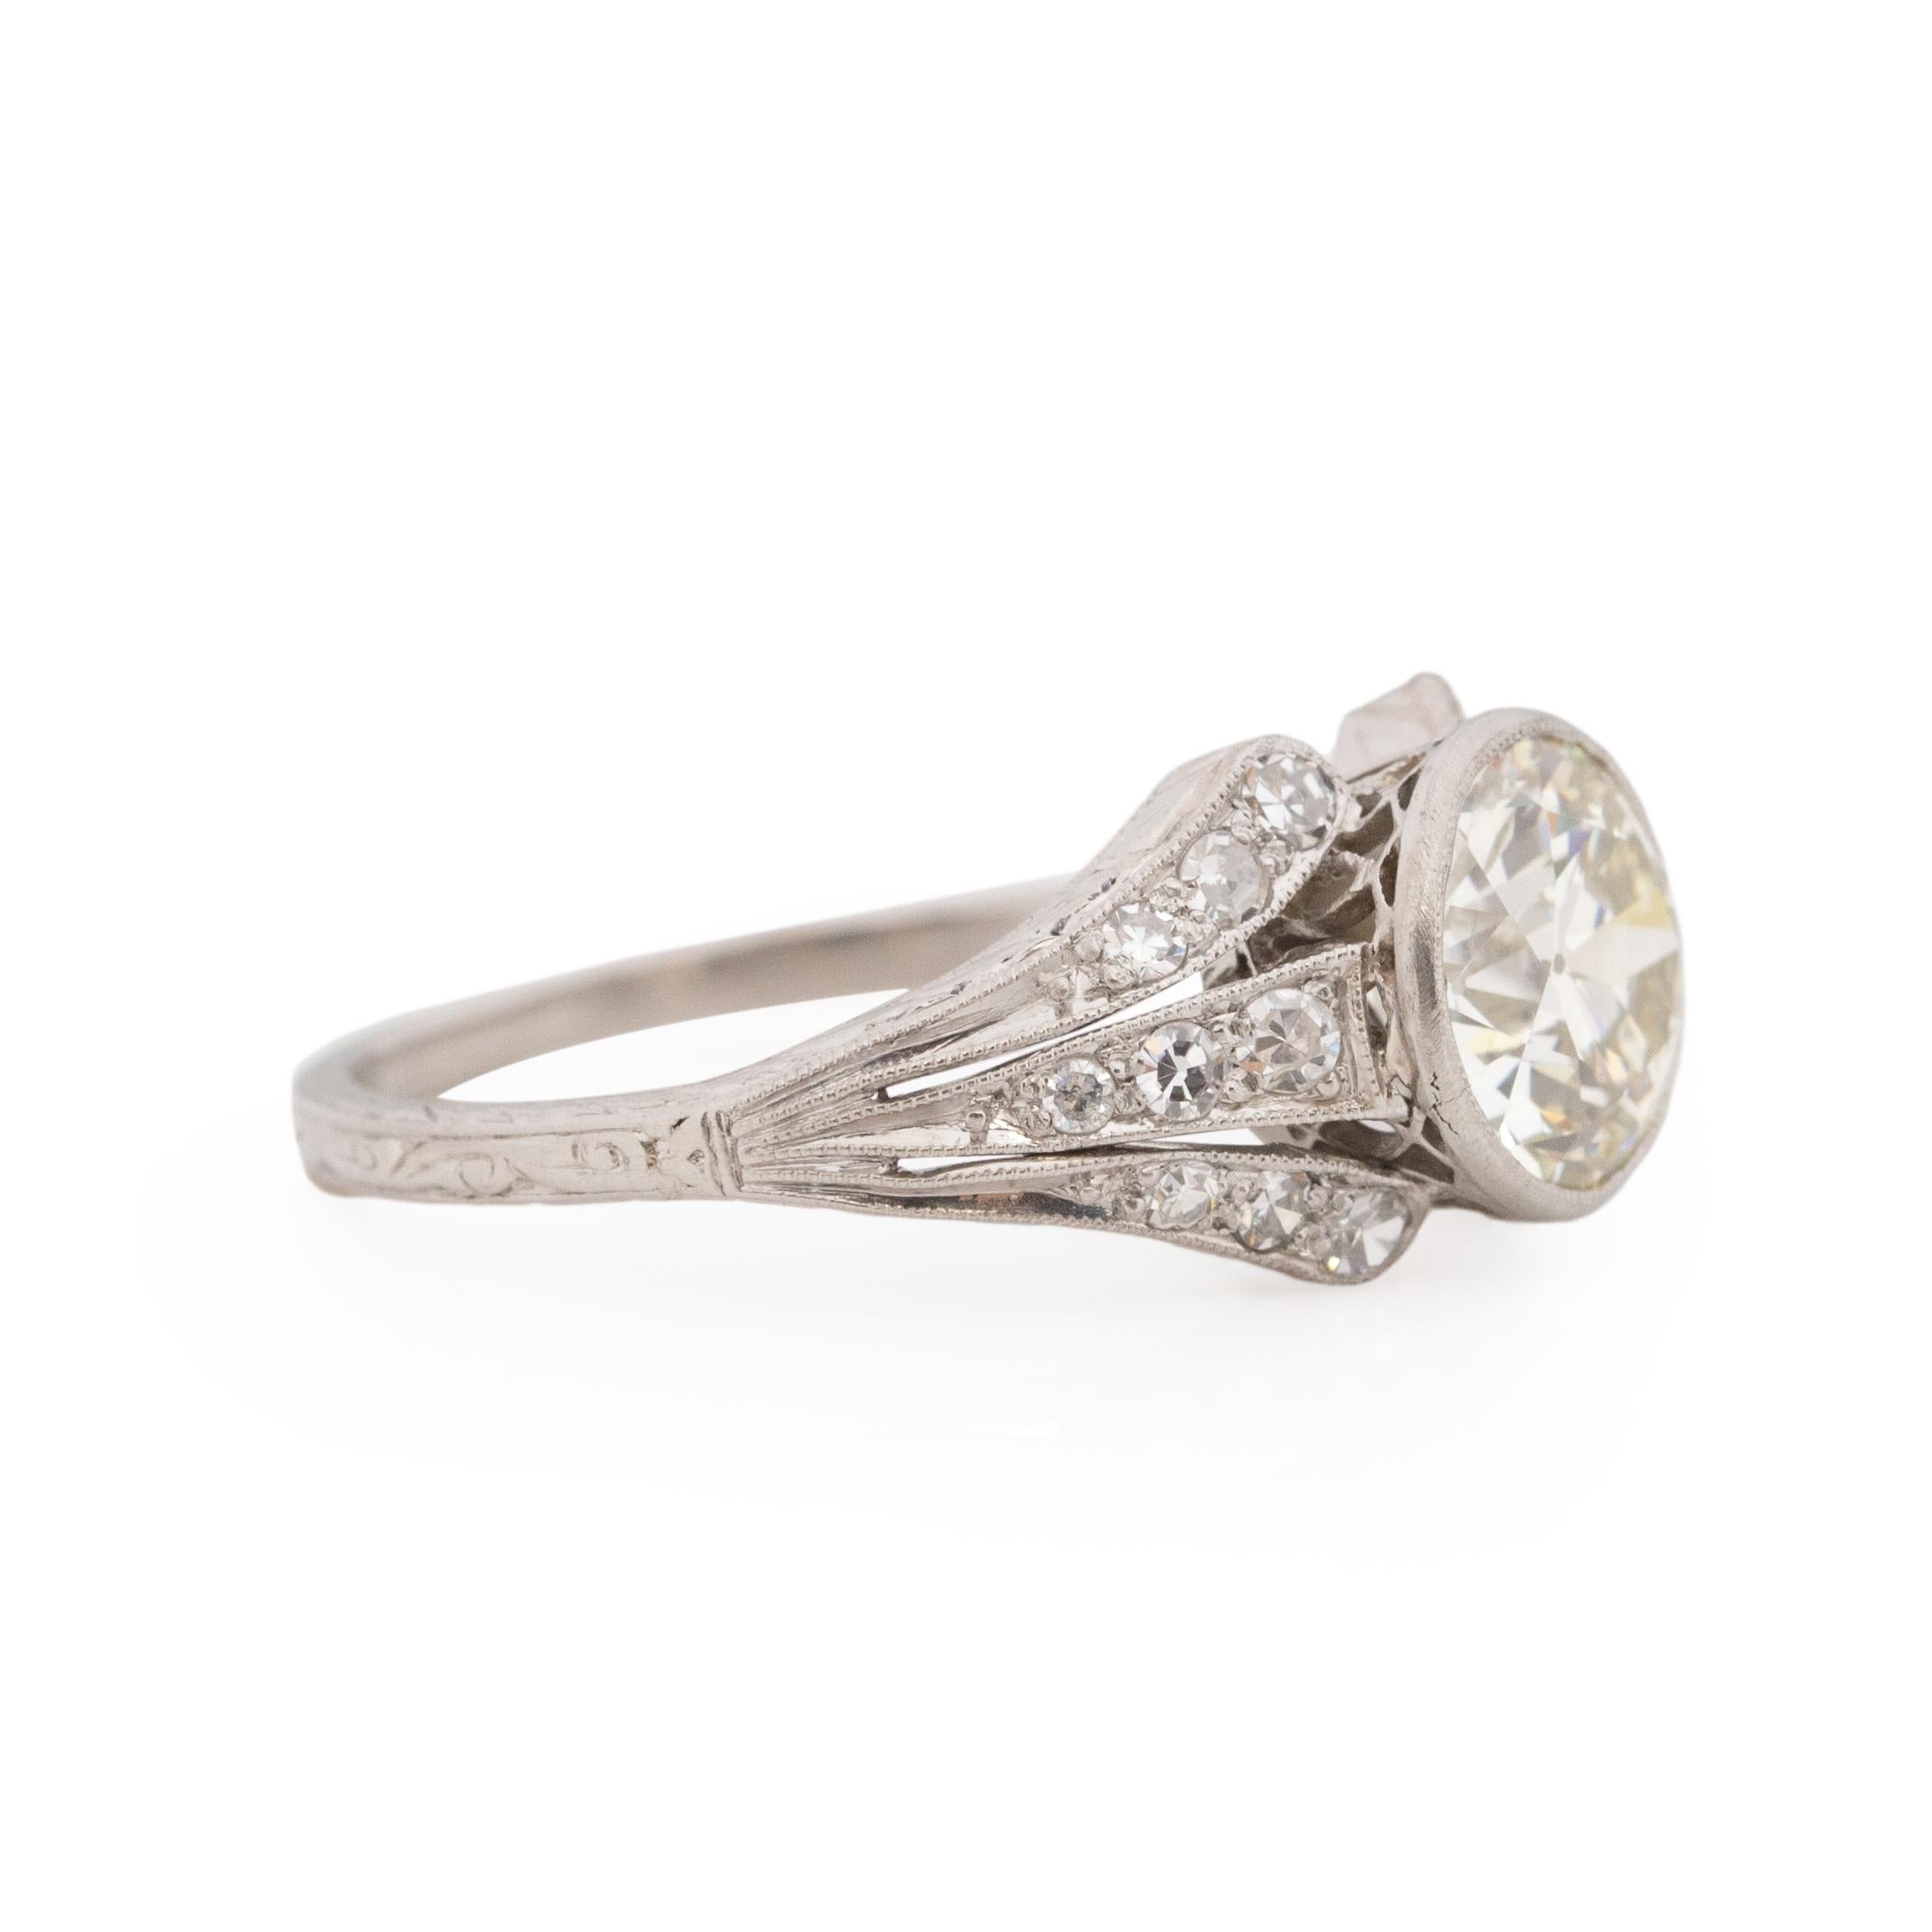 Here we have a perfectly hand-crafted platinum Edwardian era engagement ring. Starting at the shanks, which is engraved with a leaf like repeating pattern that almost wraps completely around the ring. The little bit of wear that shows is the